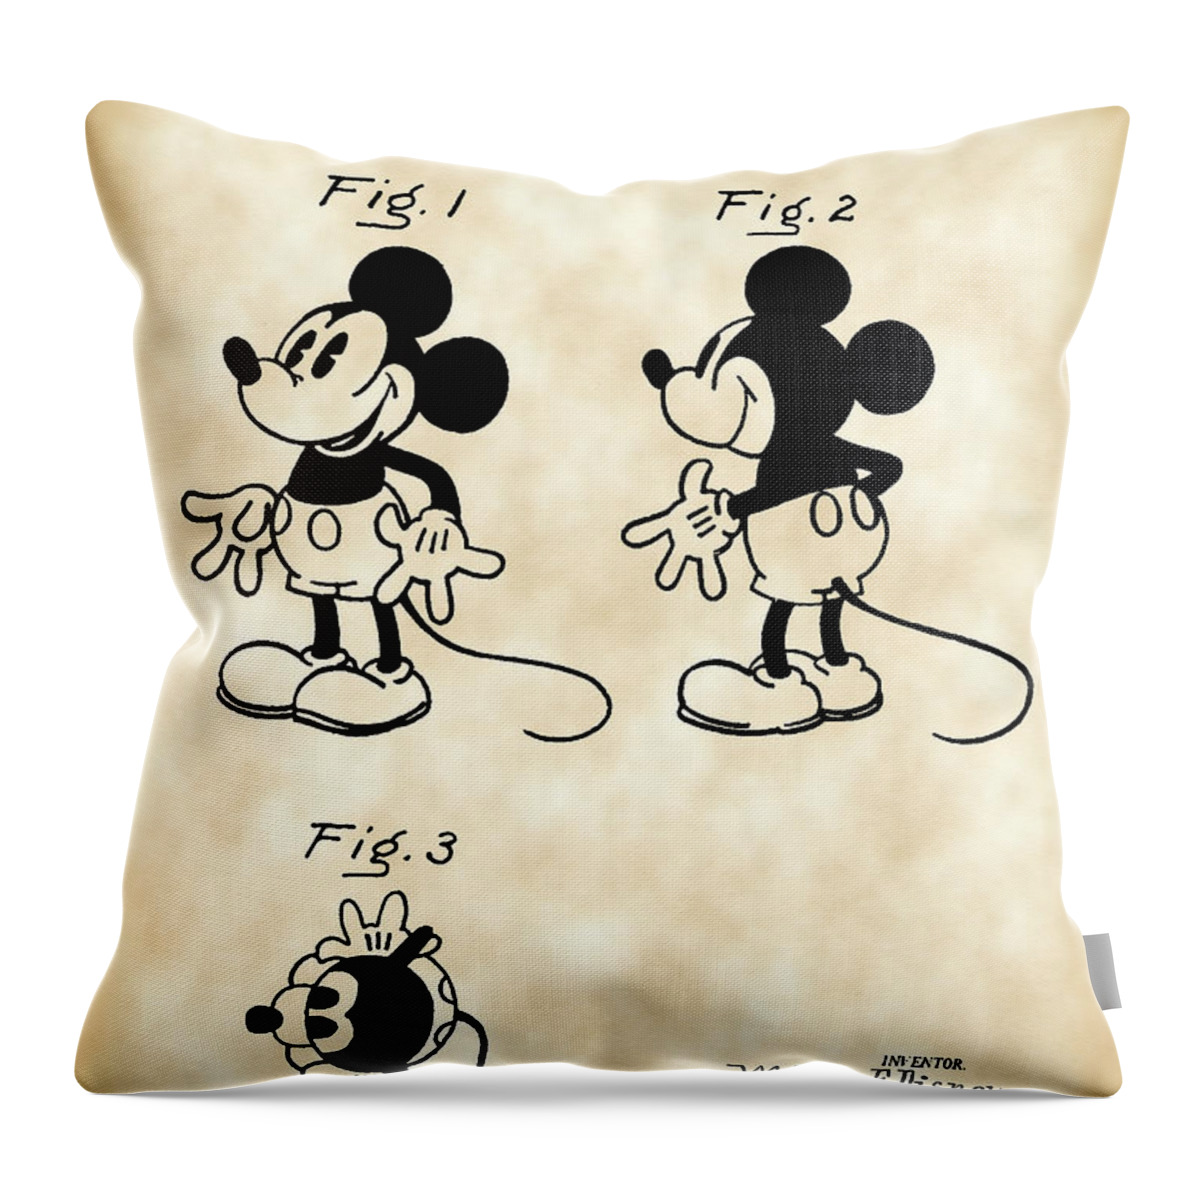 Mickey Mouse Throw Pillow featuring the digital art Walt Disney Mickey Mouse Patent 1929 - Vintage by Stephen Younts